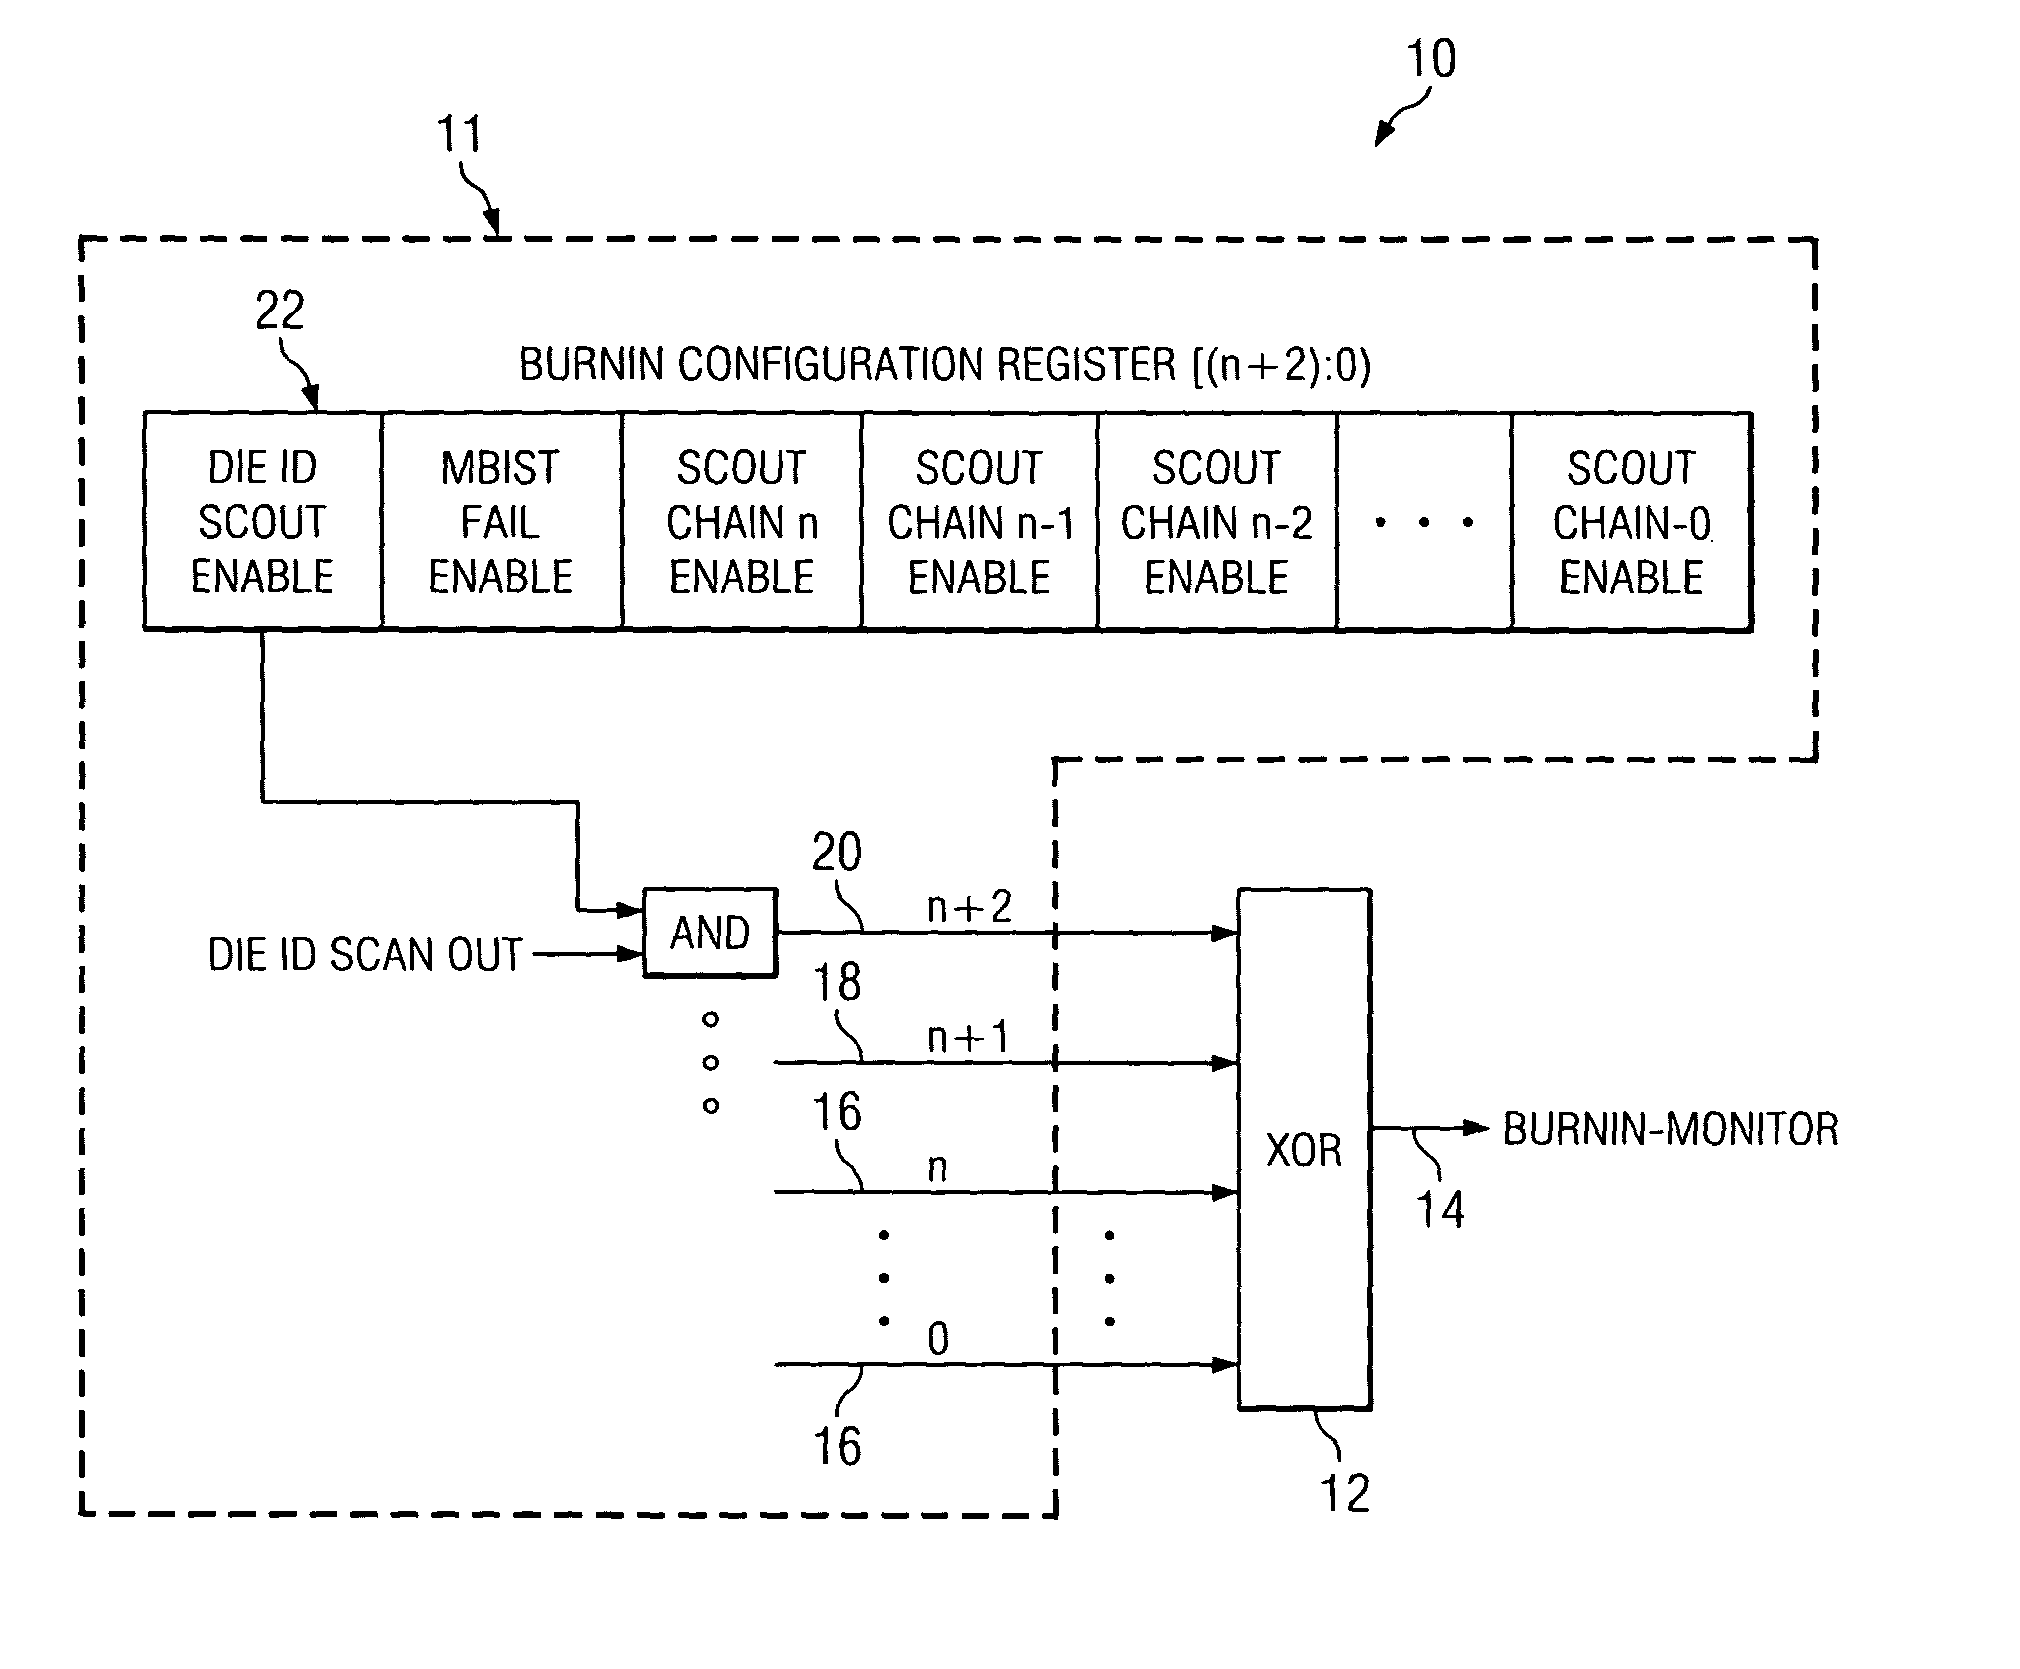 Mechanism to enhance observability of integrated circuit failures during burn-in tests